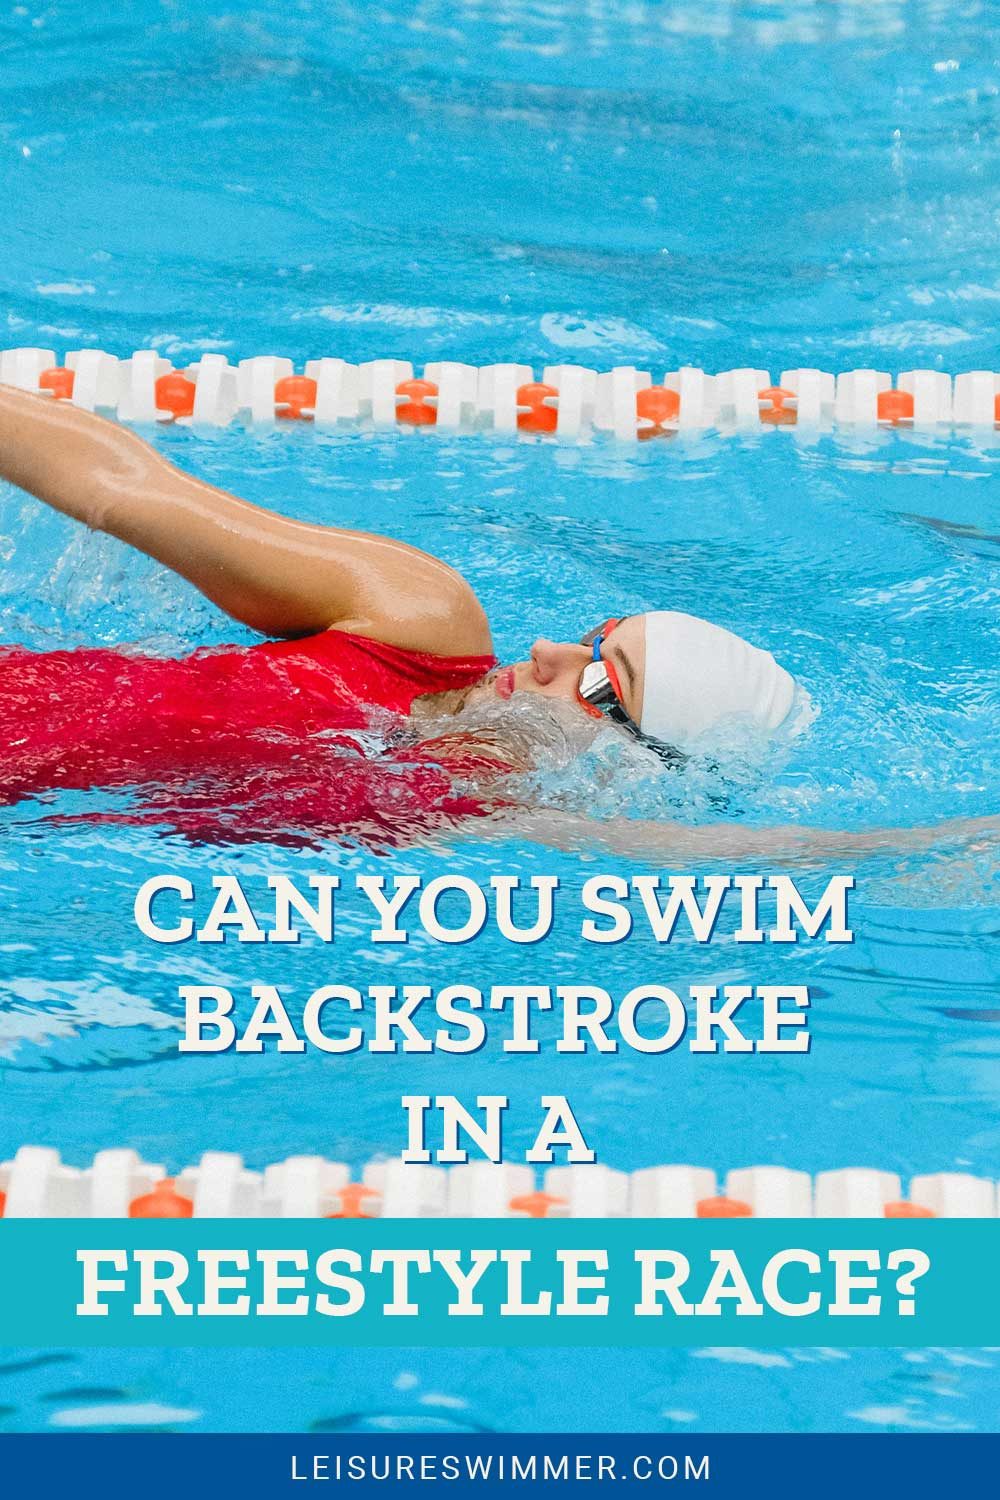 Woman swimming wearing red swim suit - Can You Swim Backstroke In A Freestyle Race?